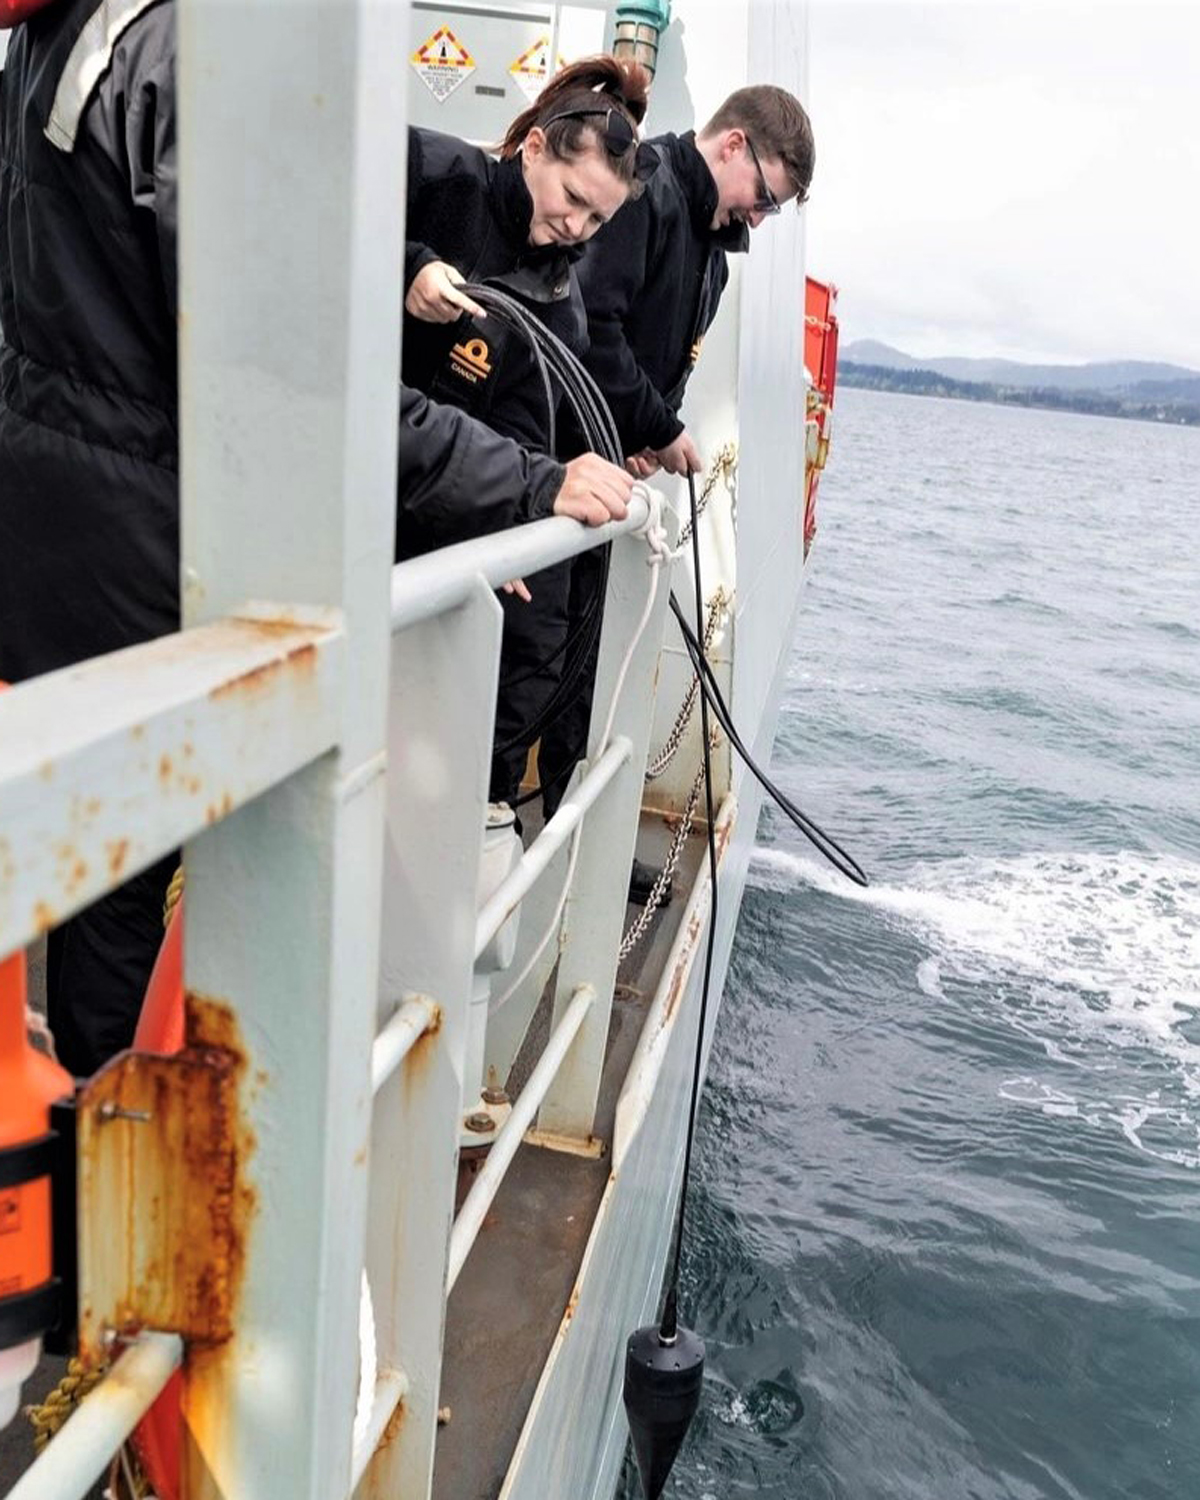 Sub-Lieutenant (SLt) Mitchell Coulombe and SLt Kayla Coletta deploy the underwater telephone from HMCS Yellowknife. Photos: Sailor 1st Class (S1) Brendan McLoughlin.